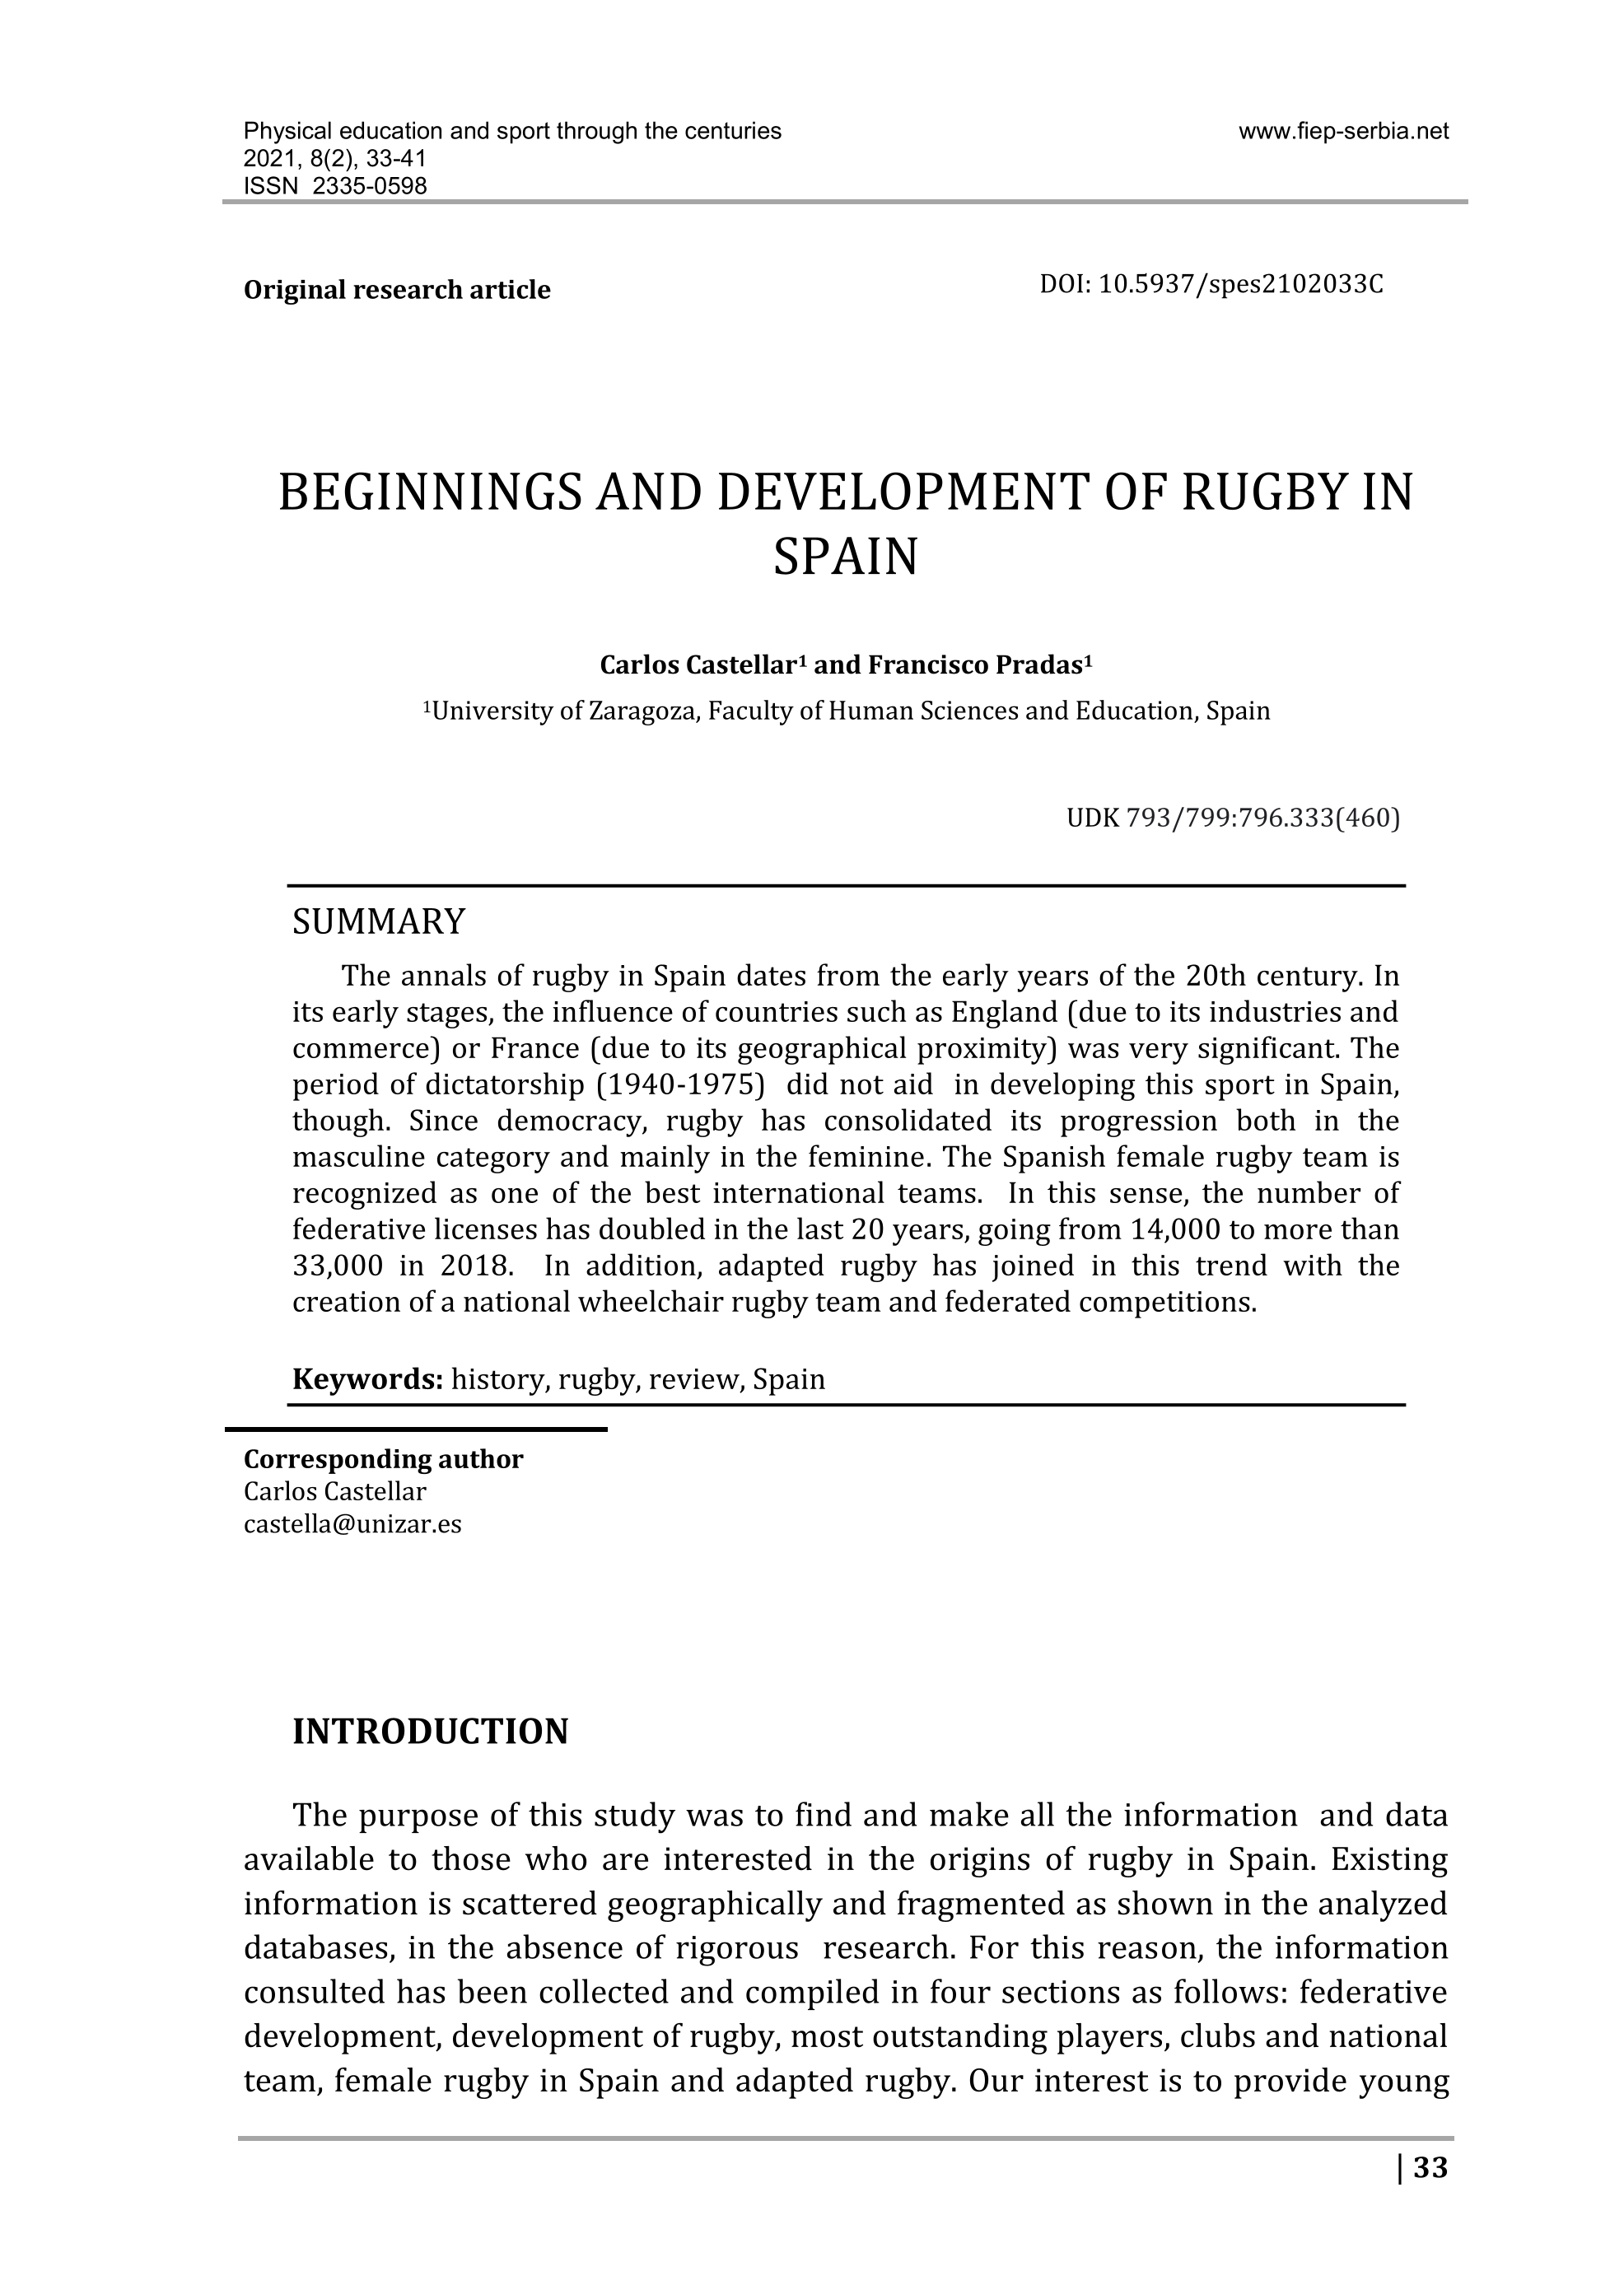 Beginnings and development of rugby in spain